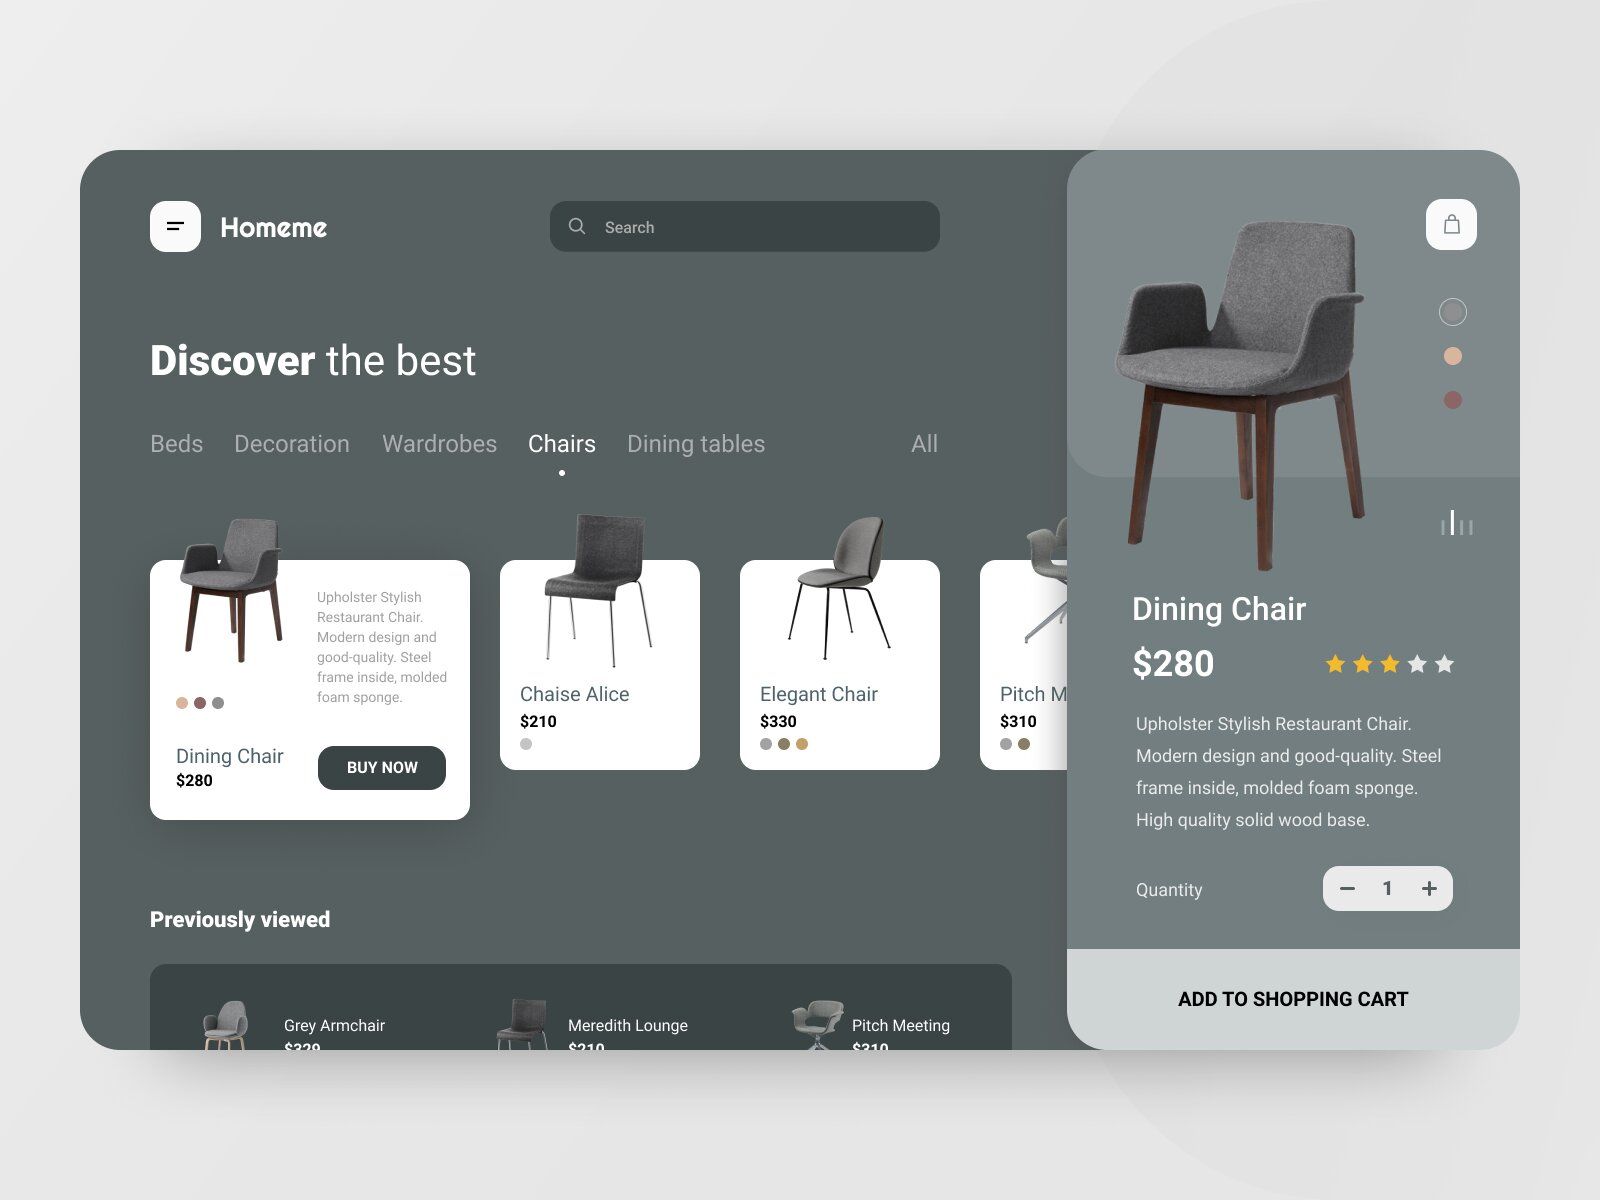 A Product Screen with sections for product description made within an eCommerce website designing (*image by [Alexey Savitskiy](https://dribbble.com/alexey_savitskiy){ rel="nofollow" target="_blank" .default-md}*)